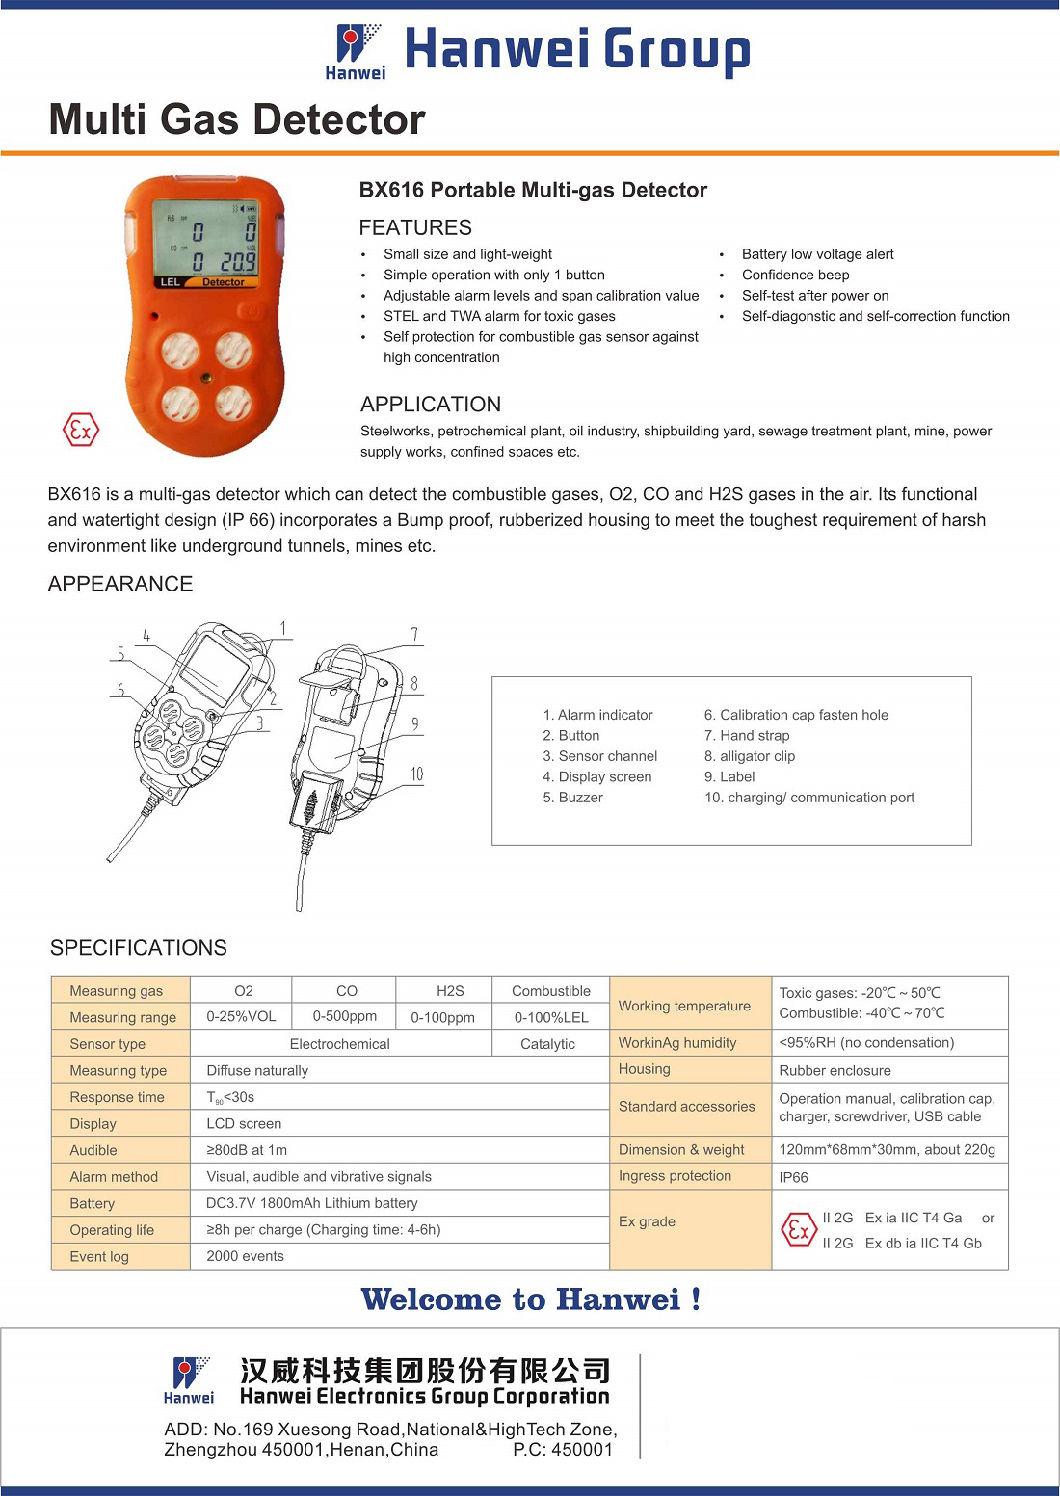 Portable Four in One Lel O2 Co H2s Multi Gas Detector for Industry Worker